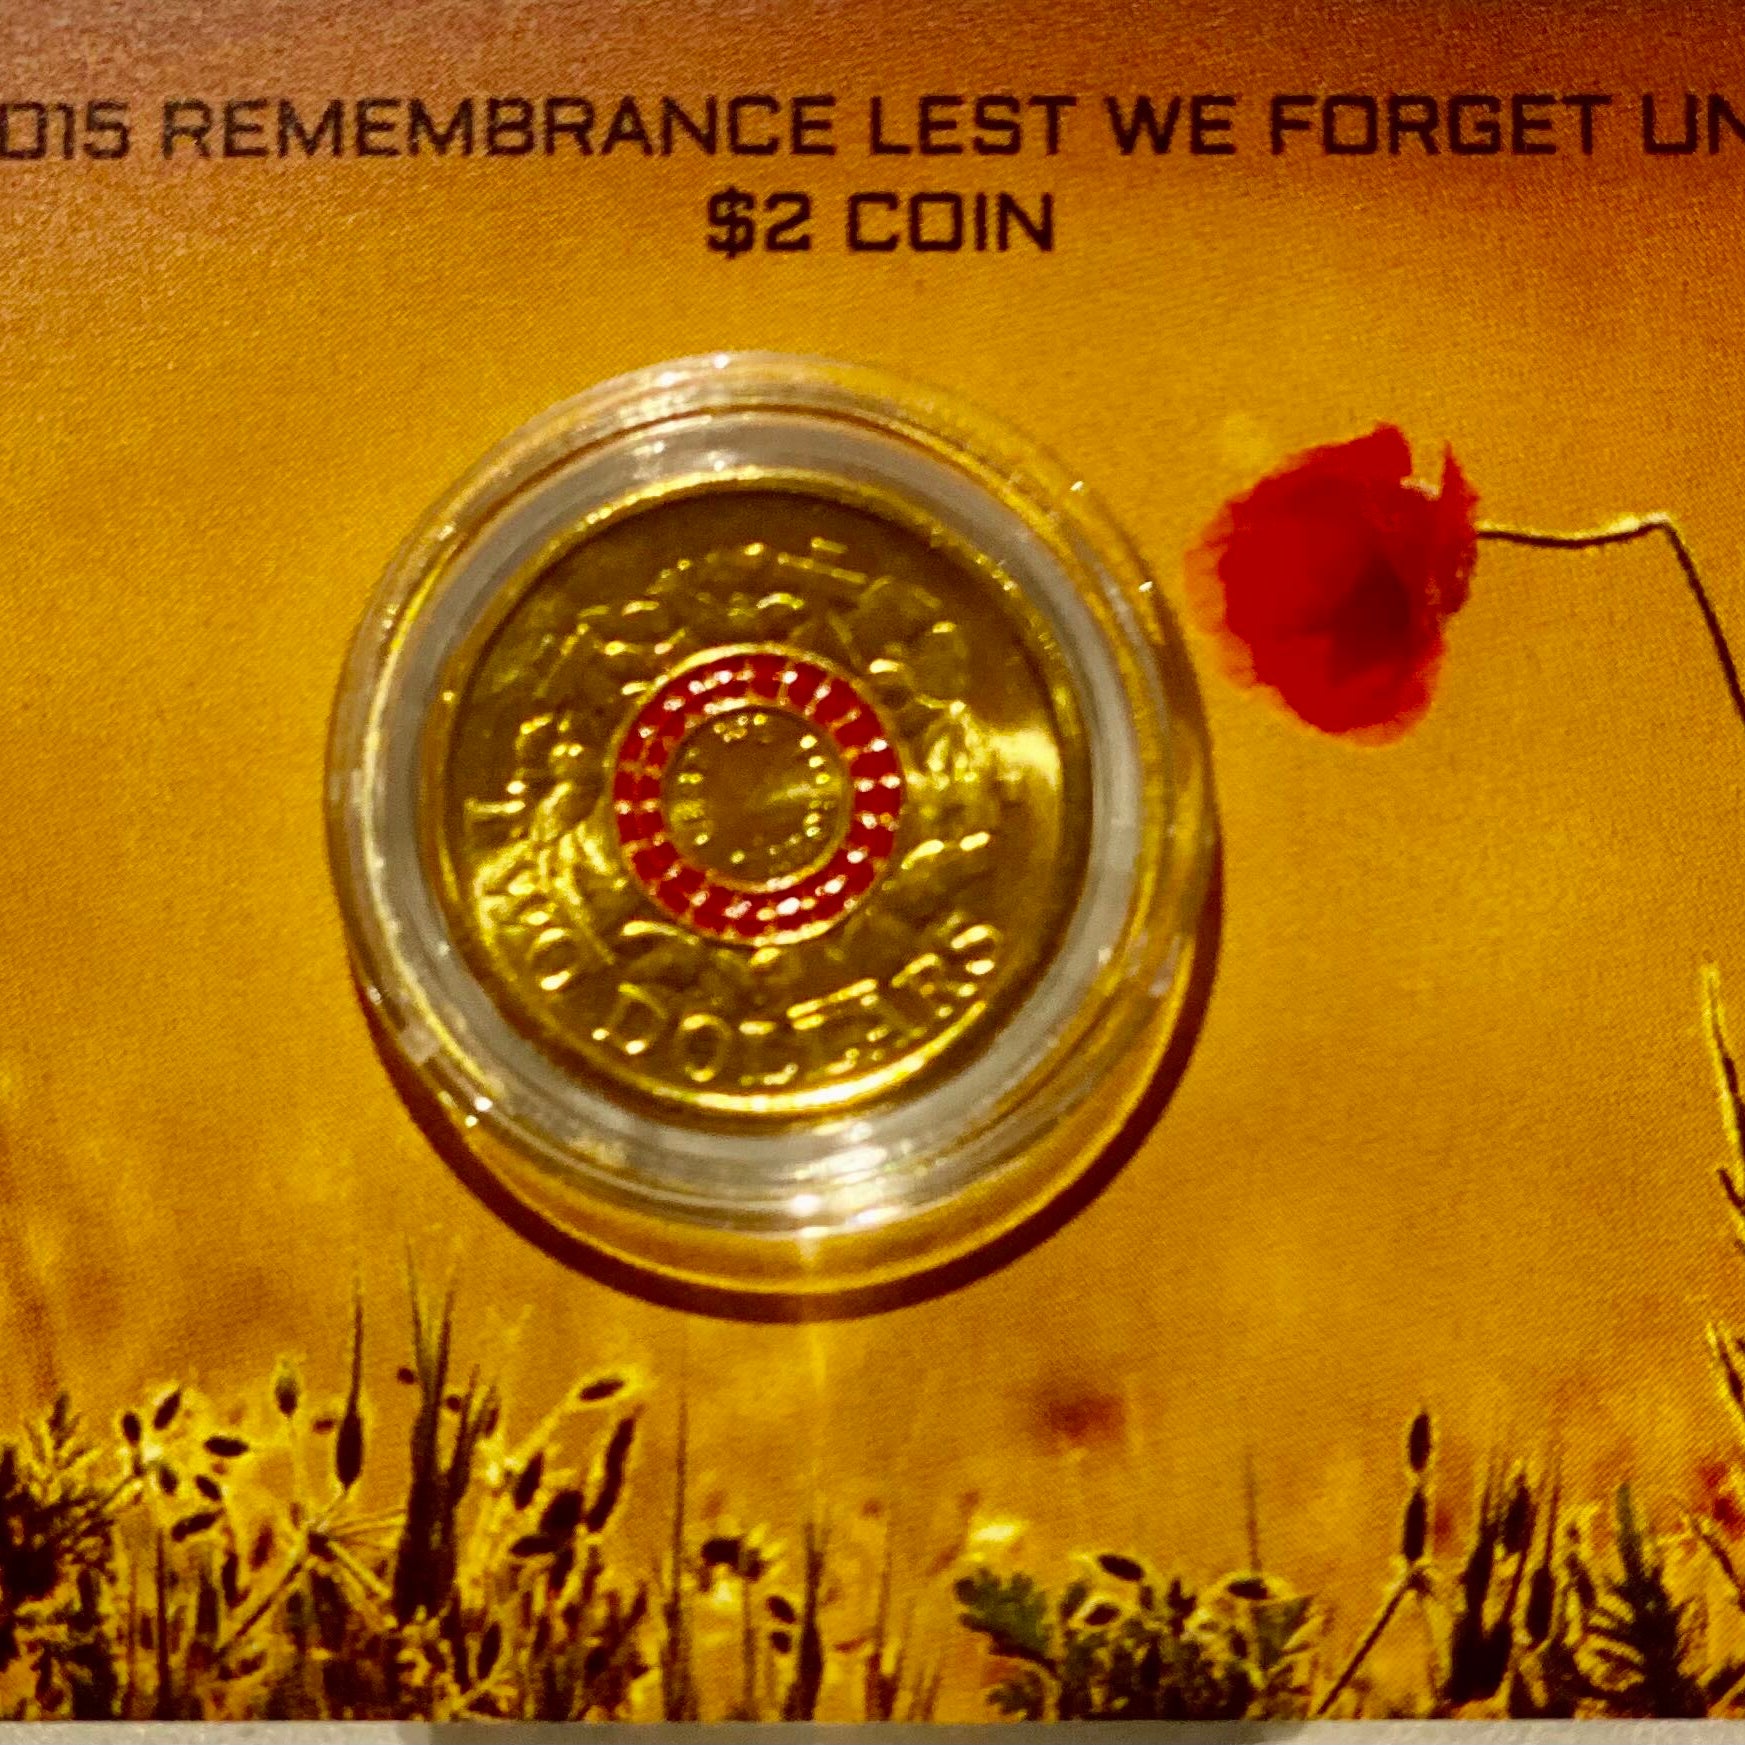 2015 Remembrance Lest We Forget $2 UNC Coin in Card